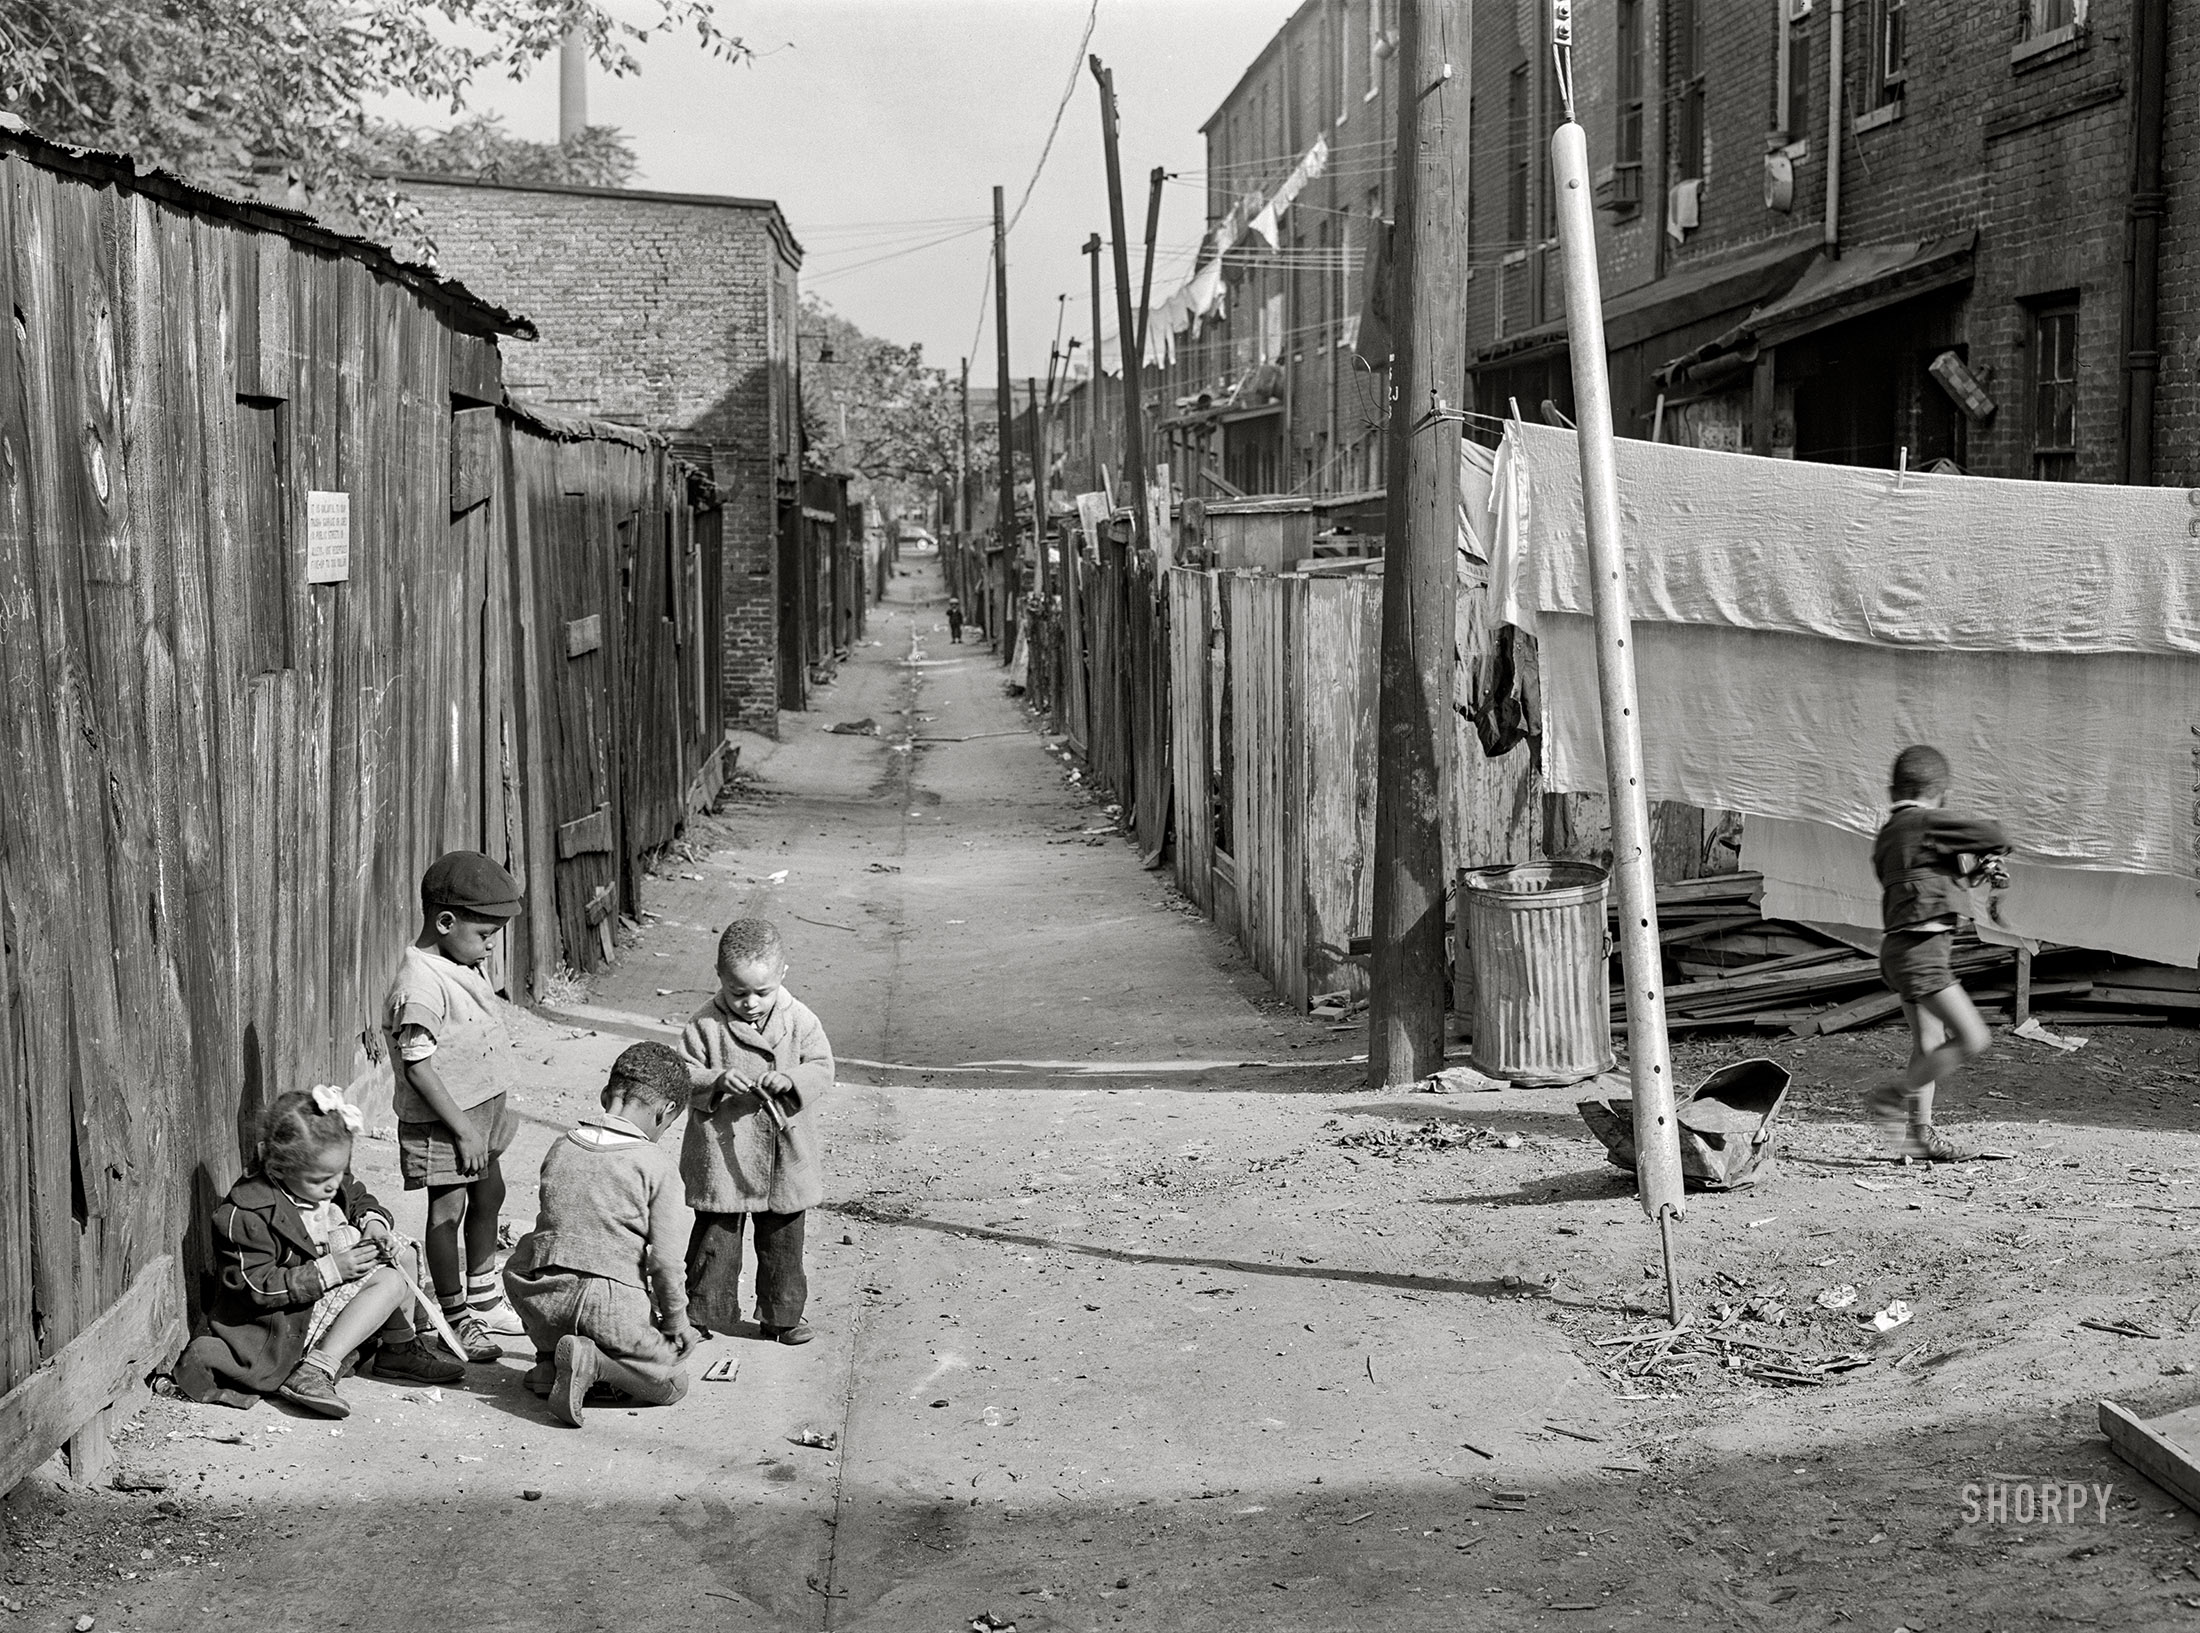 September 1941. "Children playing in DeFrees Alley, N.E. Washington, D.C., near Capitol building. One basement room rents for nine dollars a month; two rooms upstairs for sixteen dollars; one bath and cold water in the hall for entire building." Medium format acetate negative by Marion Post Wolcott for the Farm Security Administration. View full size.